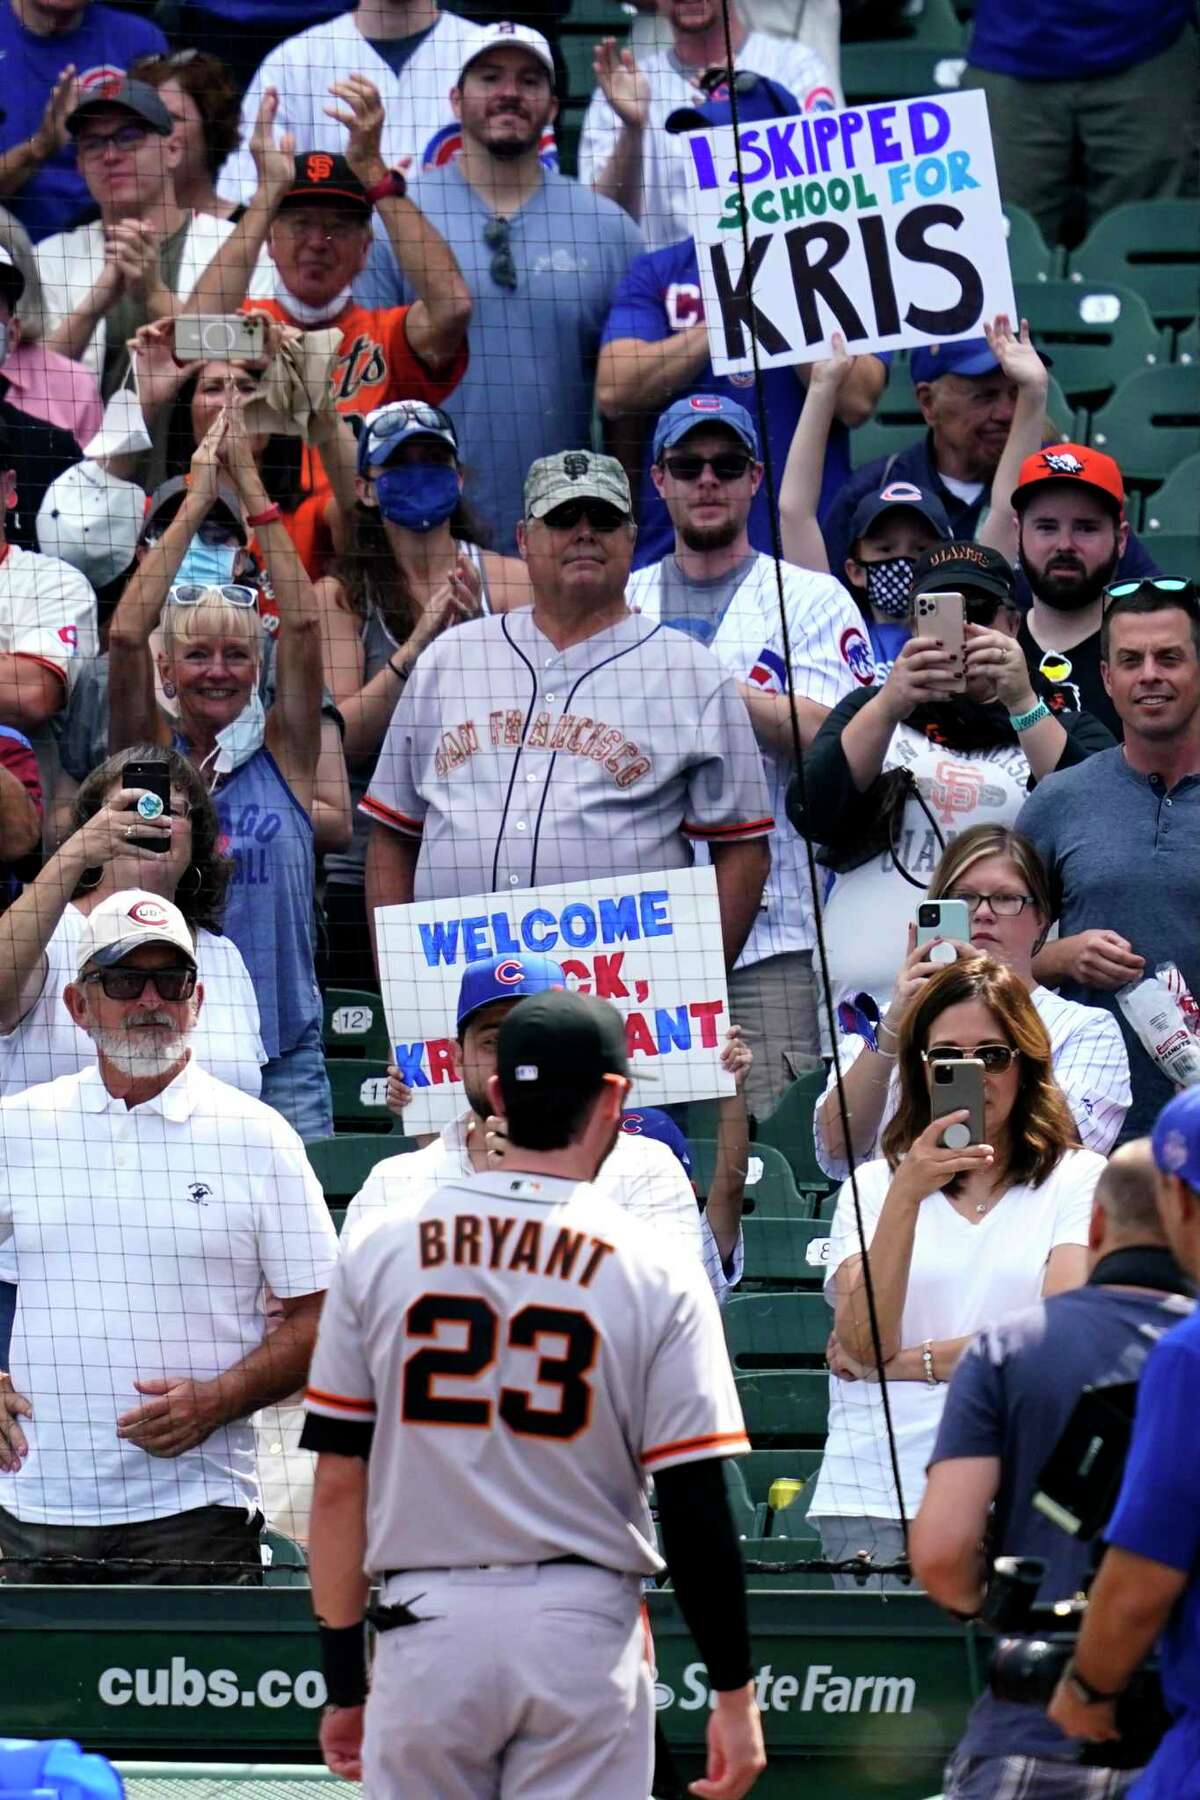 Chicago Cubs fans greet San Francisco Giants' Kris Bryant (23) before a baseball game in Chicago, Friday, Sept. 10, 2021. (AP Photo/Nam Y. Huh)